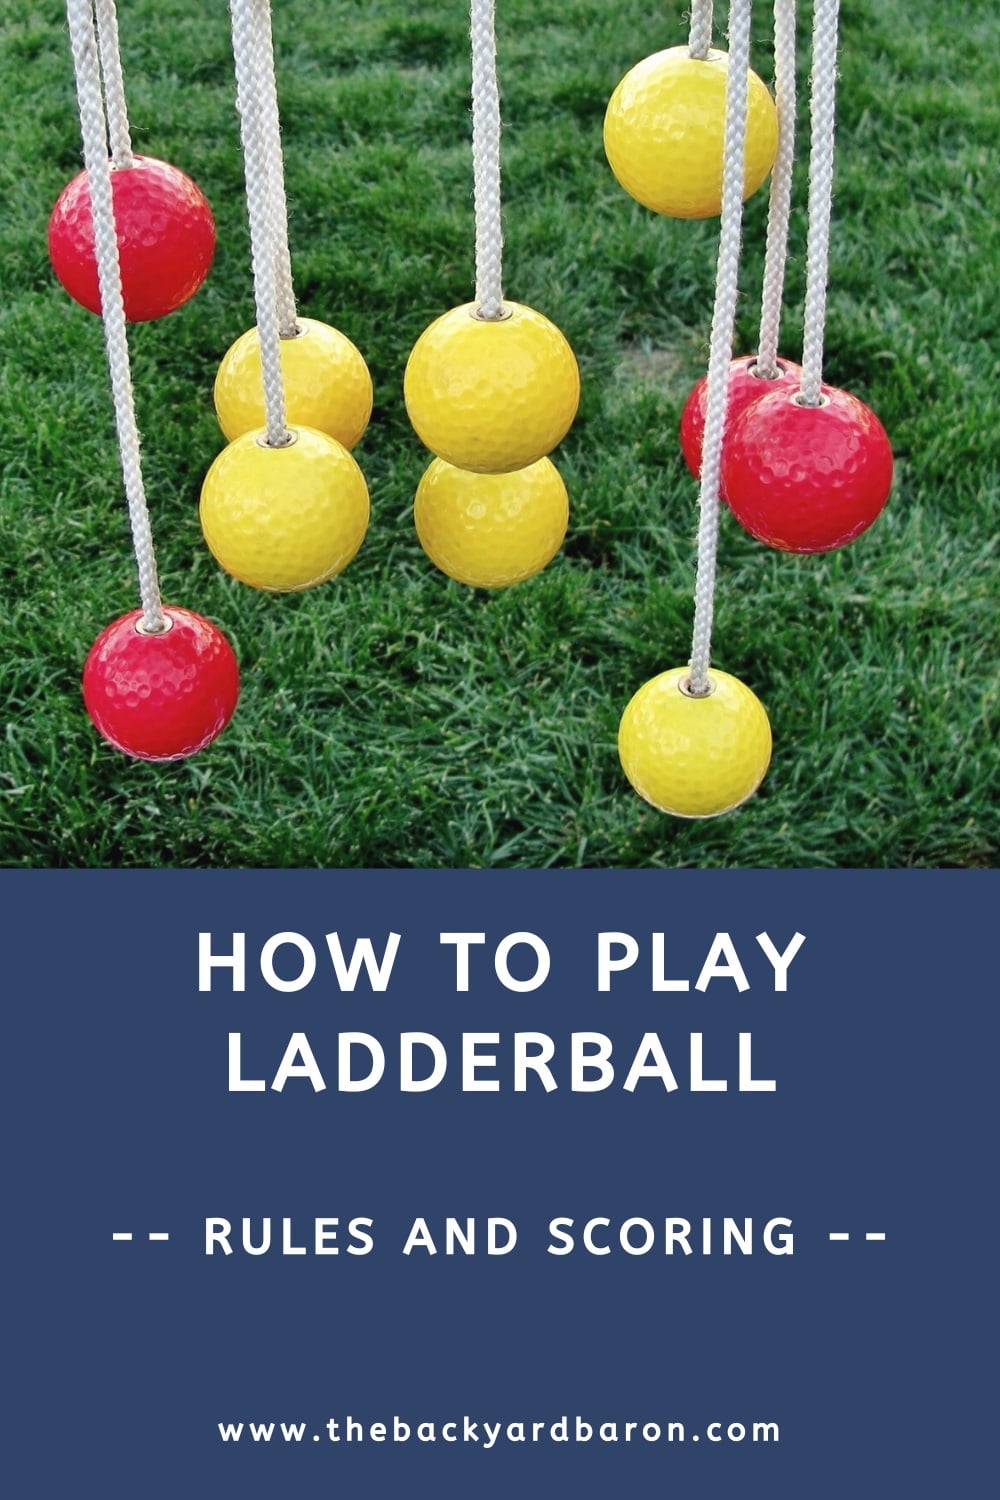 How to play ladder ball (rules and scoring)